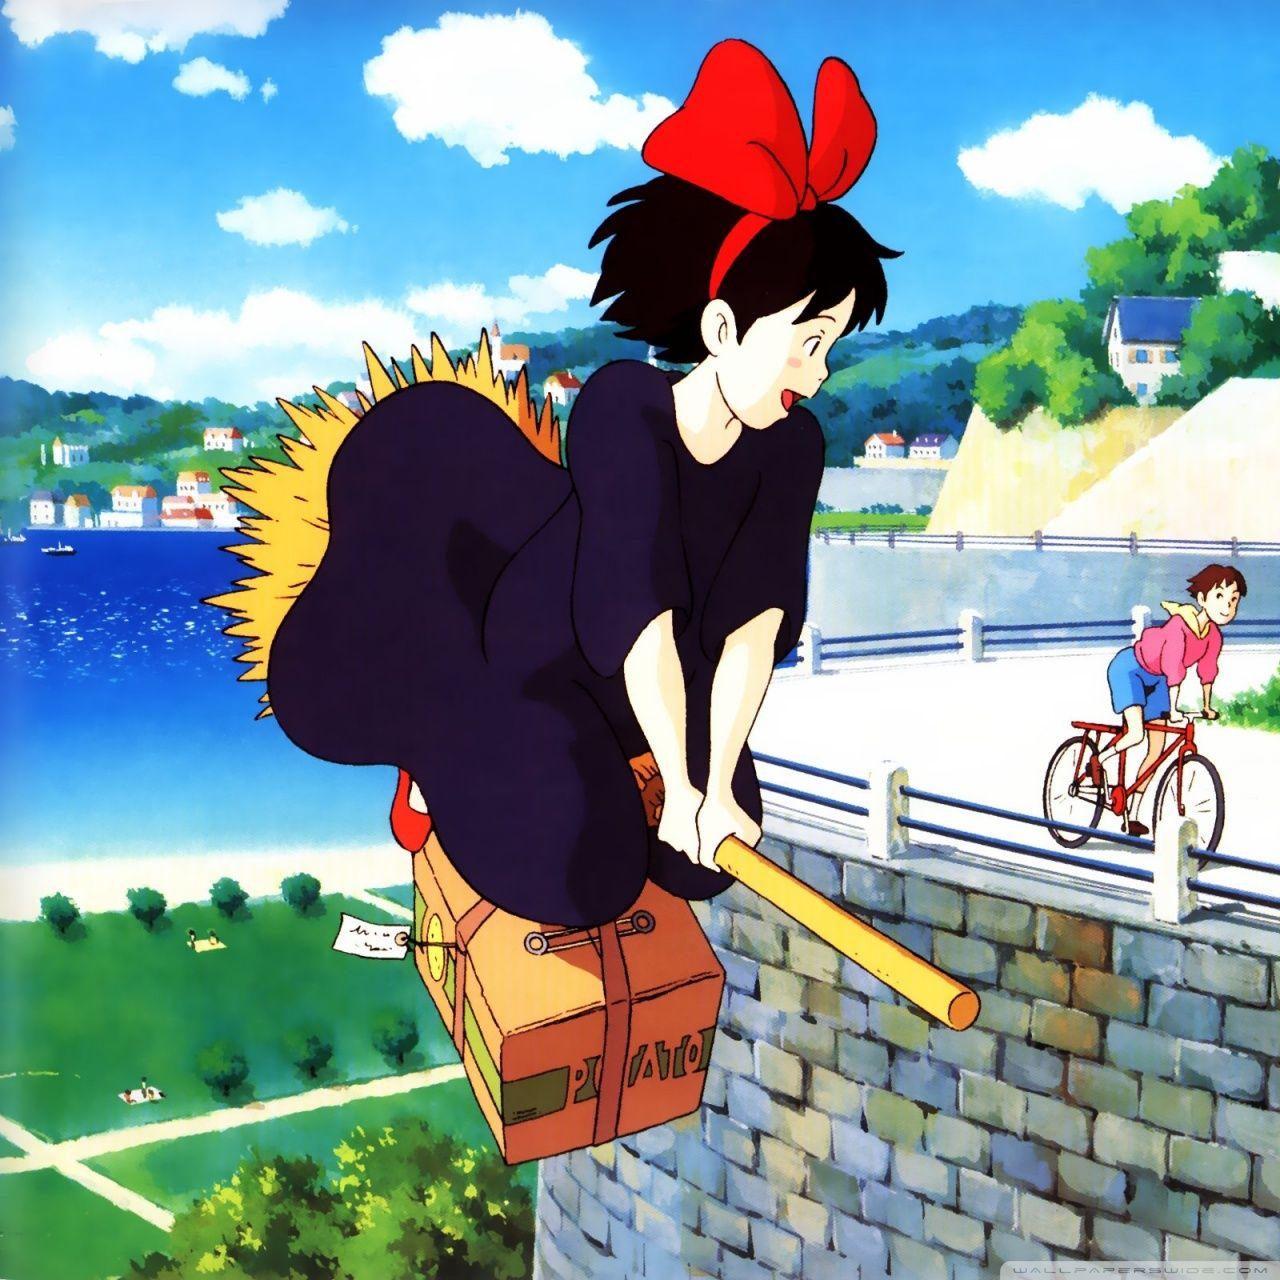 UHD Kiki's Delivery Service Wallpapers - Wallpaper Cave